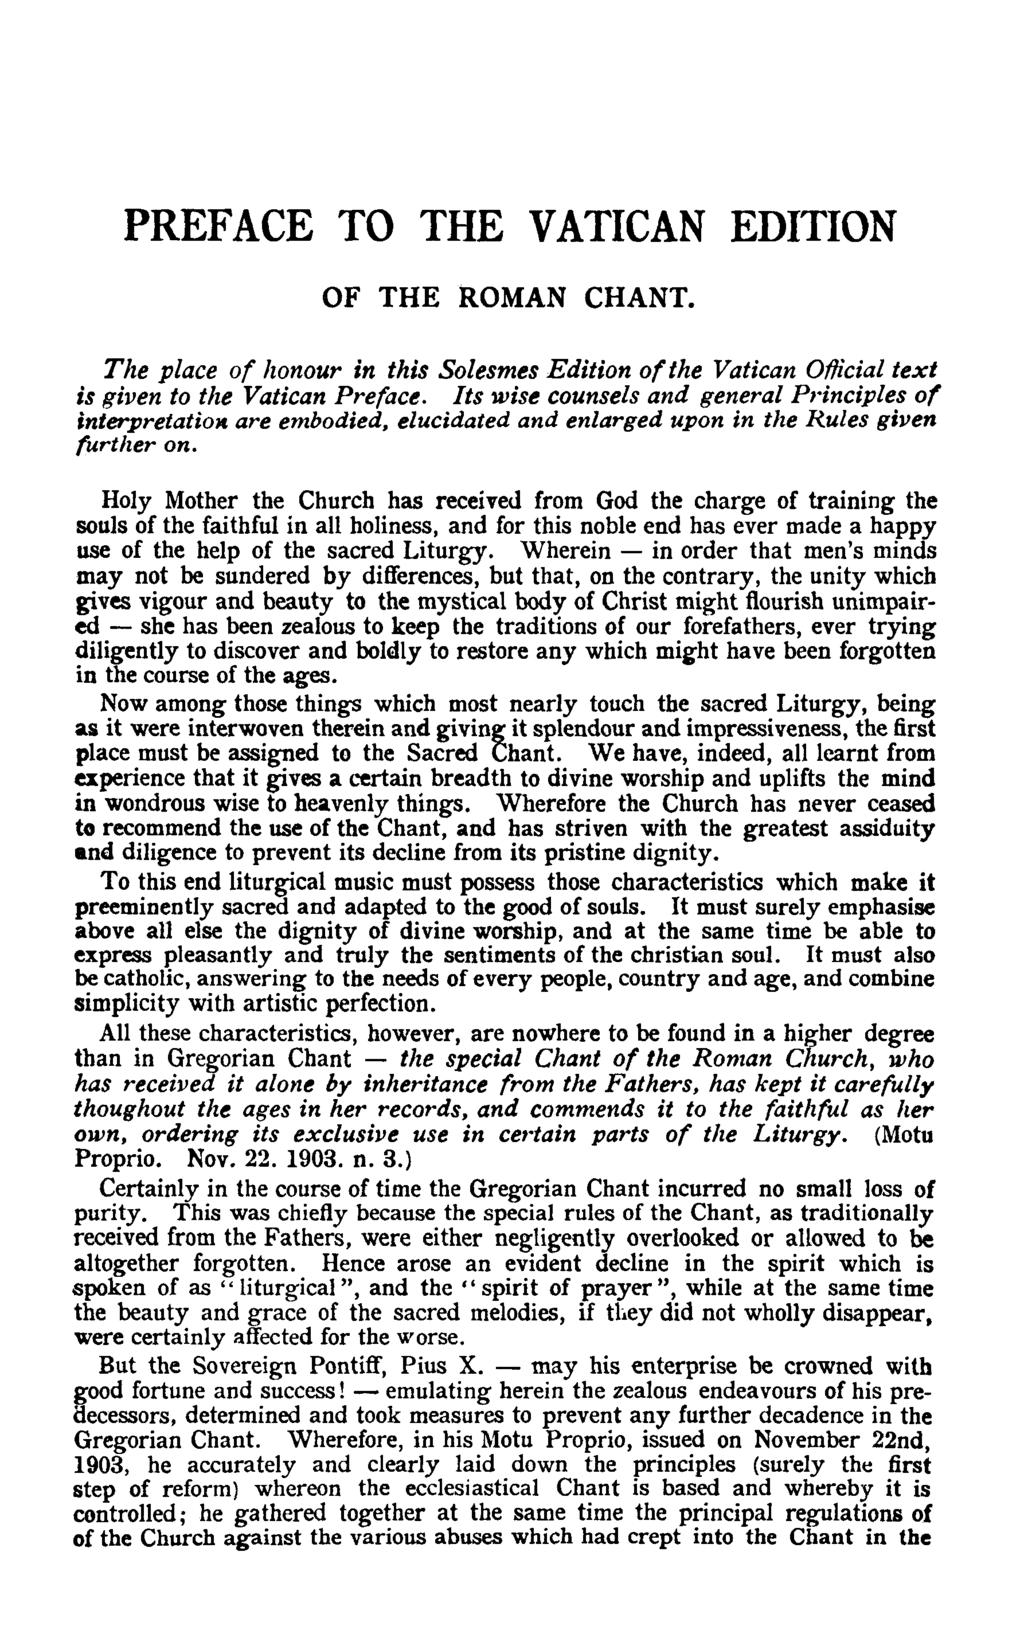 PREFACE TO THE VATICAN EDITION OF THE ROMAN CHANT. The place of honour in this Solesmes Edition of the Vatican Official text is given to the Vatican Preface.